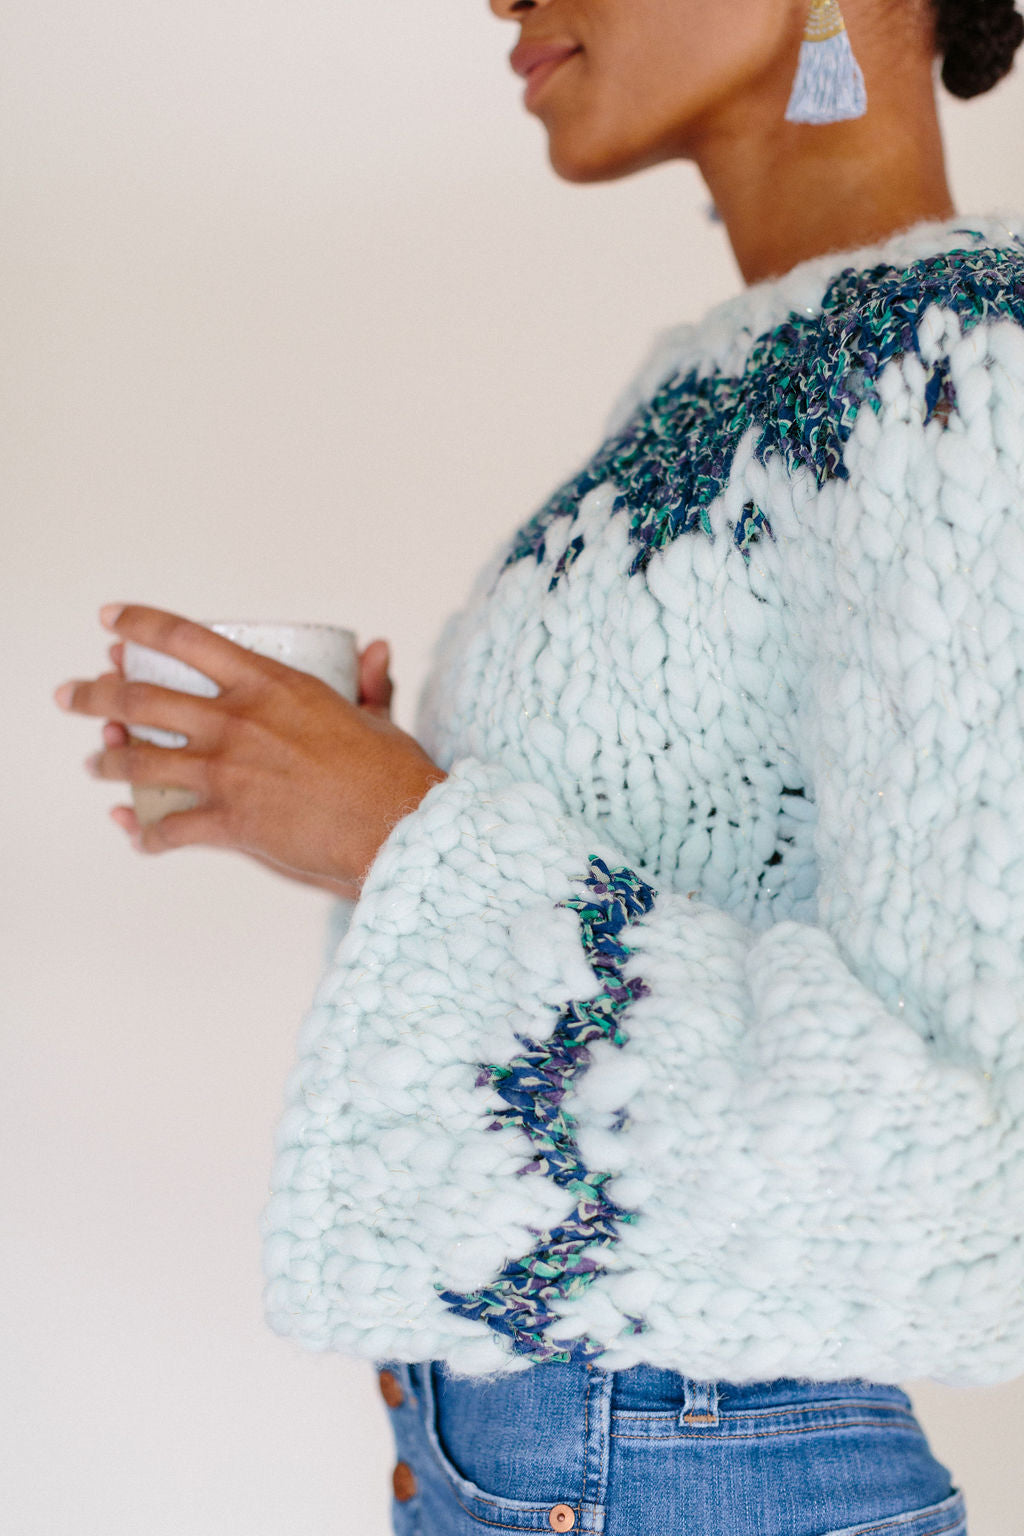 Exhale Sweater Pattern